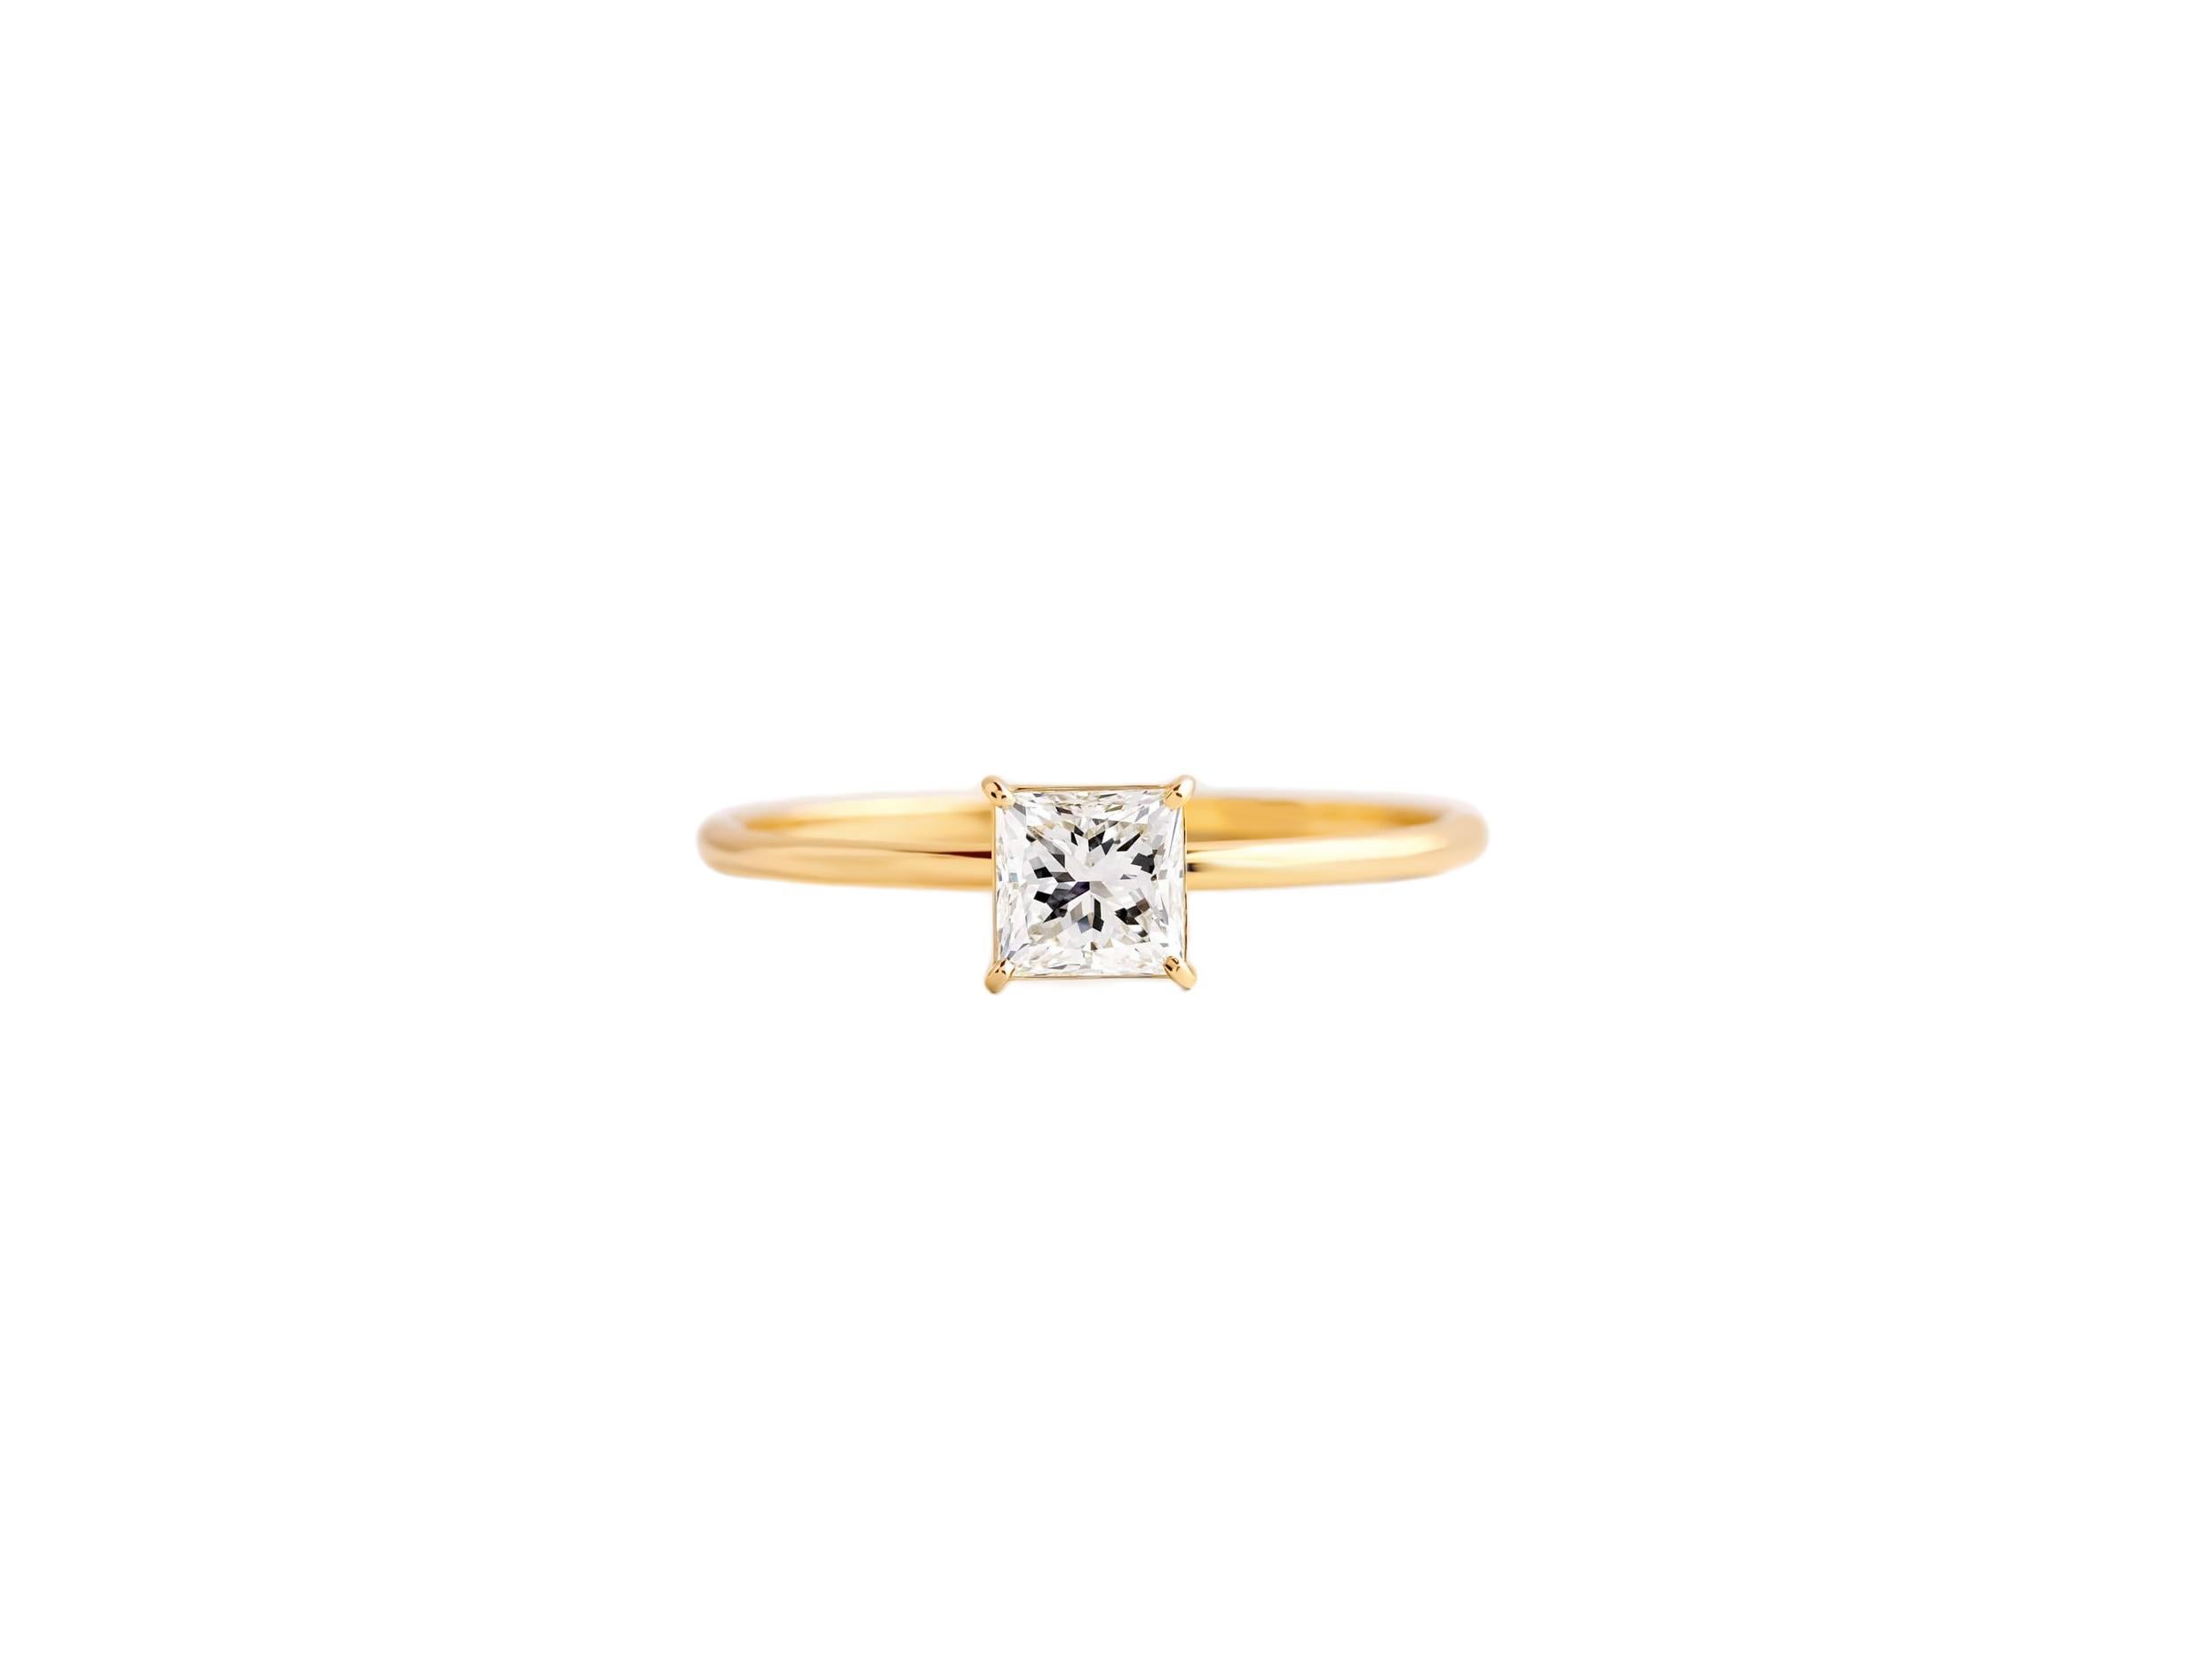 0.5 ct Princess cut moissanite 14k gold ring. Diamond like moissanite ring. Princess cut moissanite engagement ring. Solitaire moissanite ring.

Metal: 14k gold
Weight: 2 gr depends from size
Moissanite: weight 0.5 ct, D/ VS, princess cut

auction